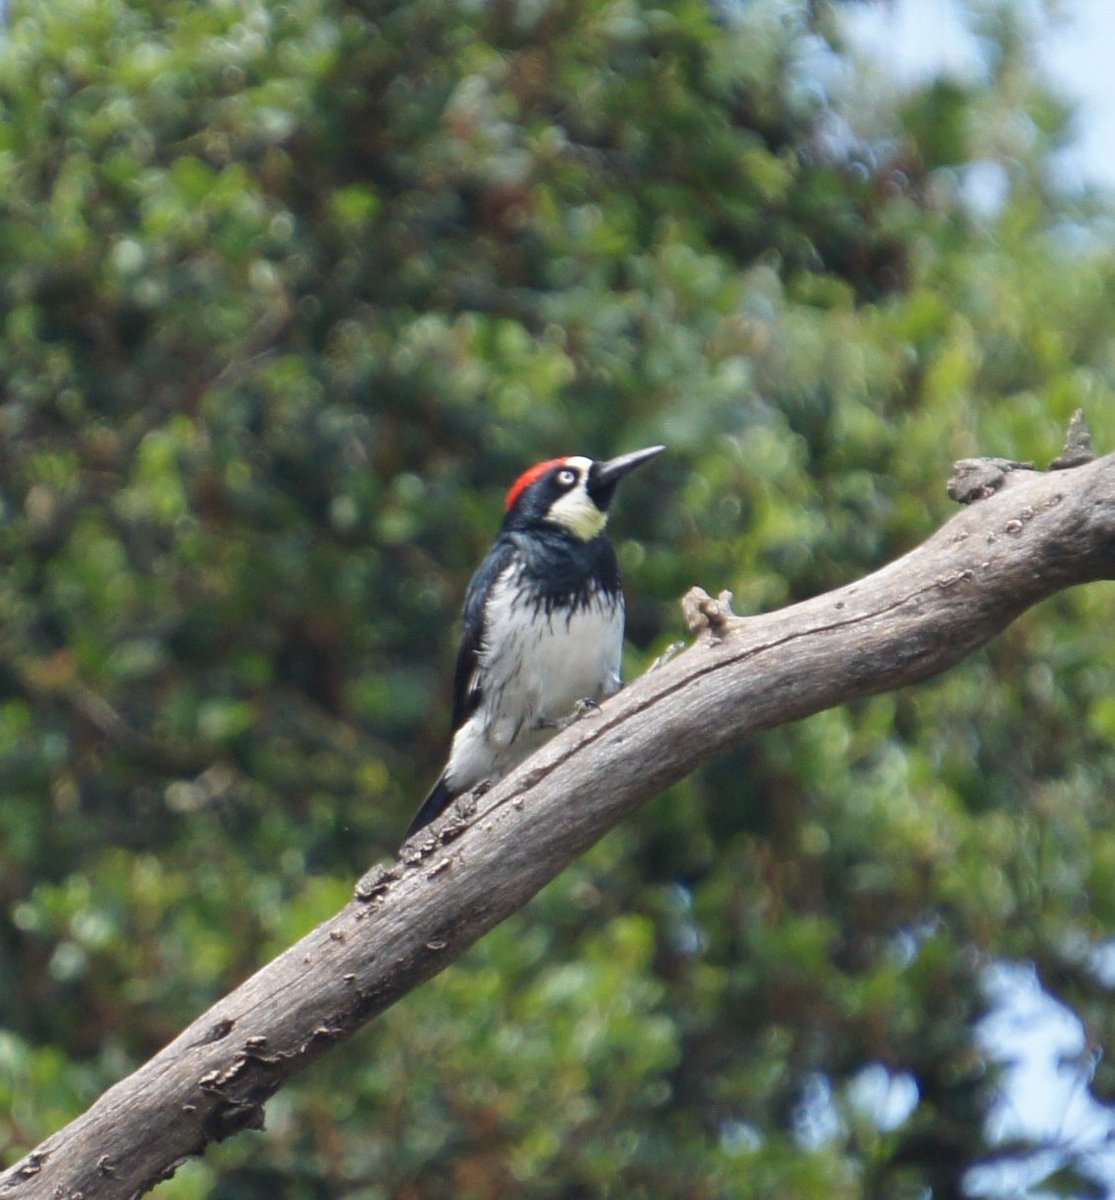 Have dusted off the old digital camera. Here's an acorn woodpecker, bit blurry, from this morning. That's a mean looking beak.

#birding #NaturePhotography #naturephoto #wildlifephotography #nature #outdoors #noplanetB